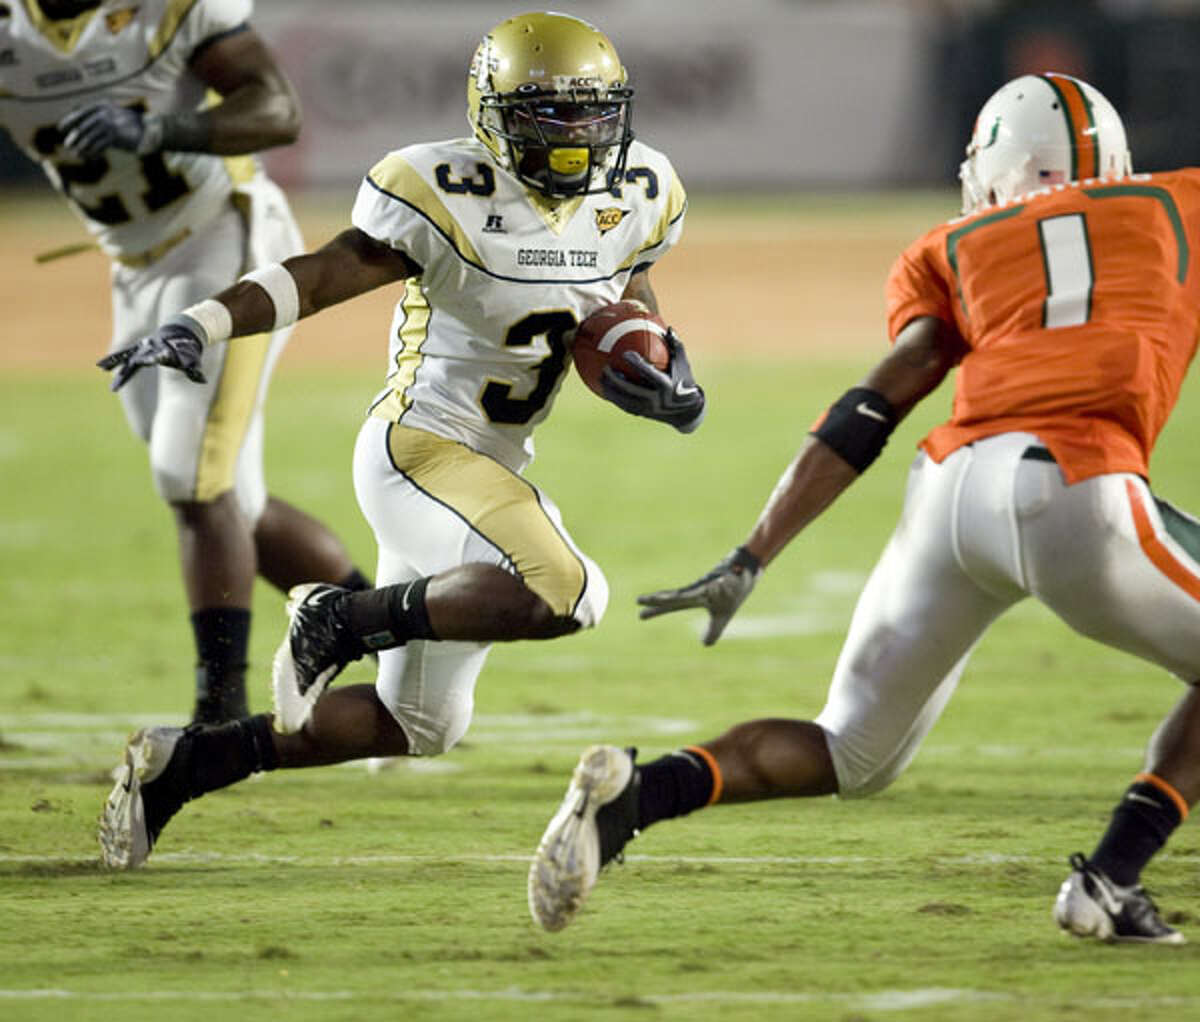 Marcus Wright, RB, Georgia Tech: The junior from Reagan, running against Miami last year, played in all 14 games, rushing for 190 yards and three TDs on 33 carries (5.8-yard average) as a reserve.